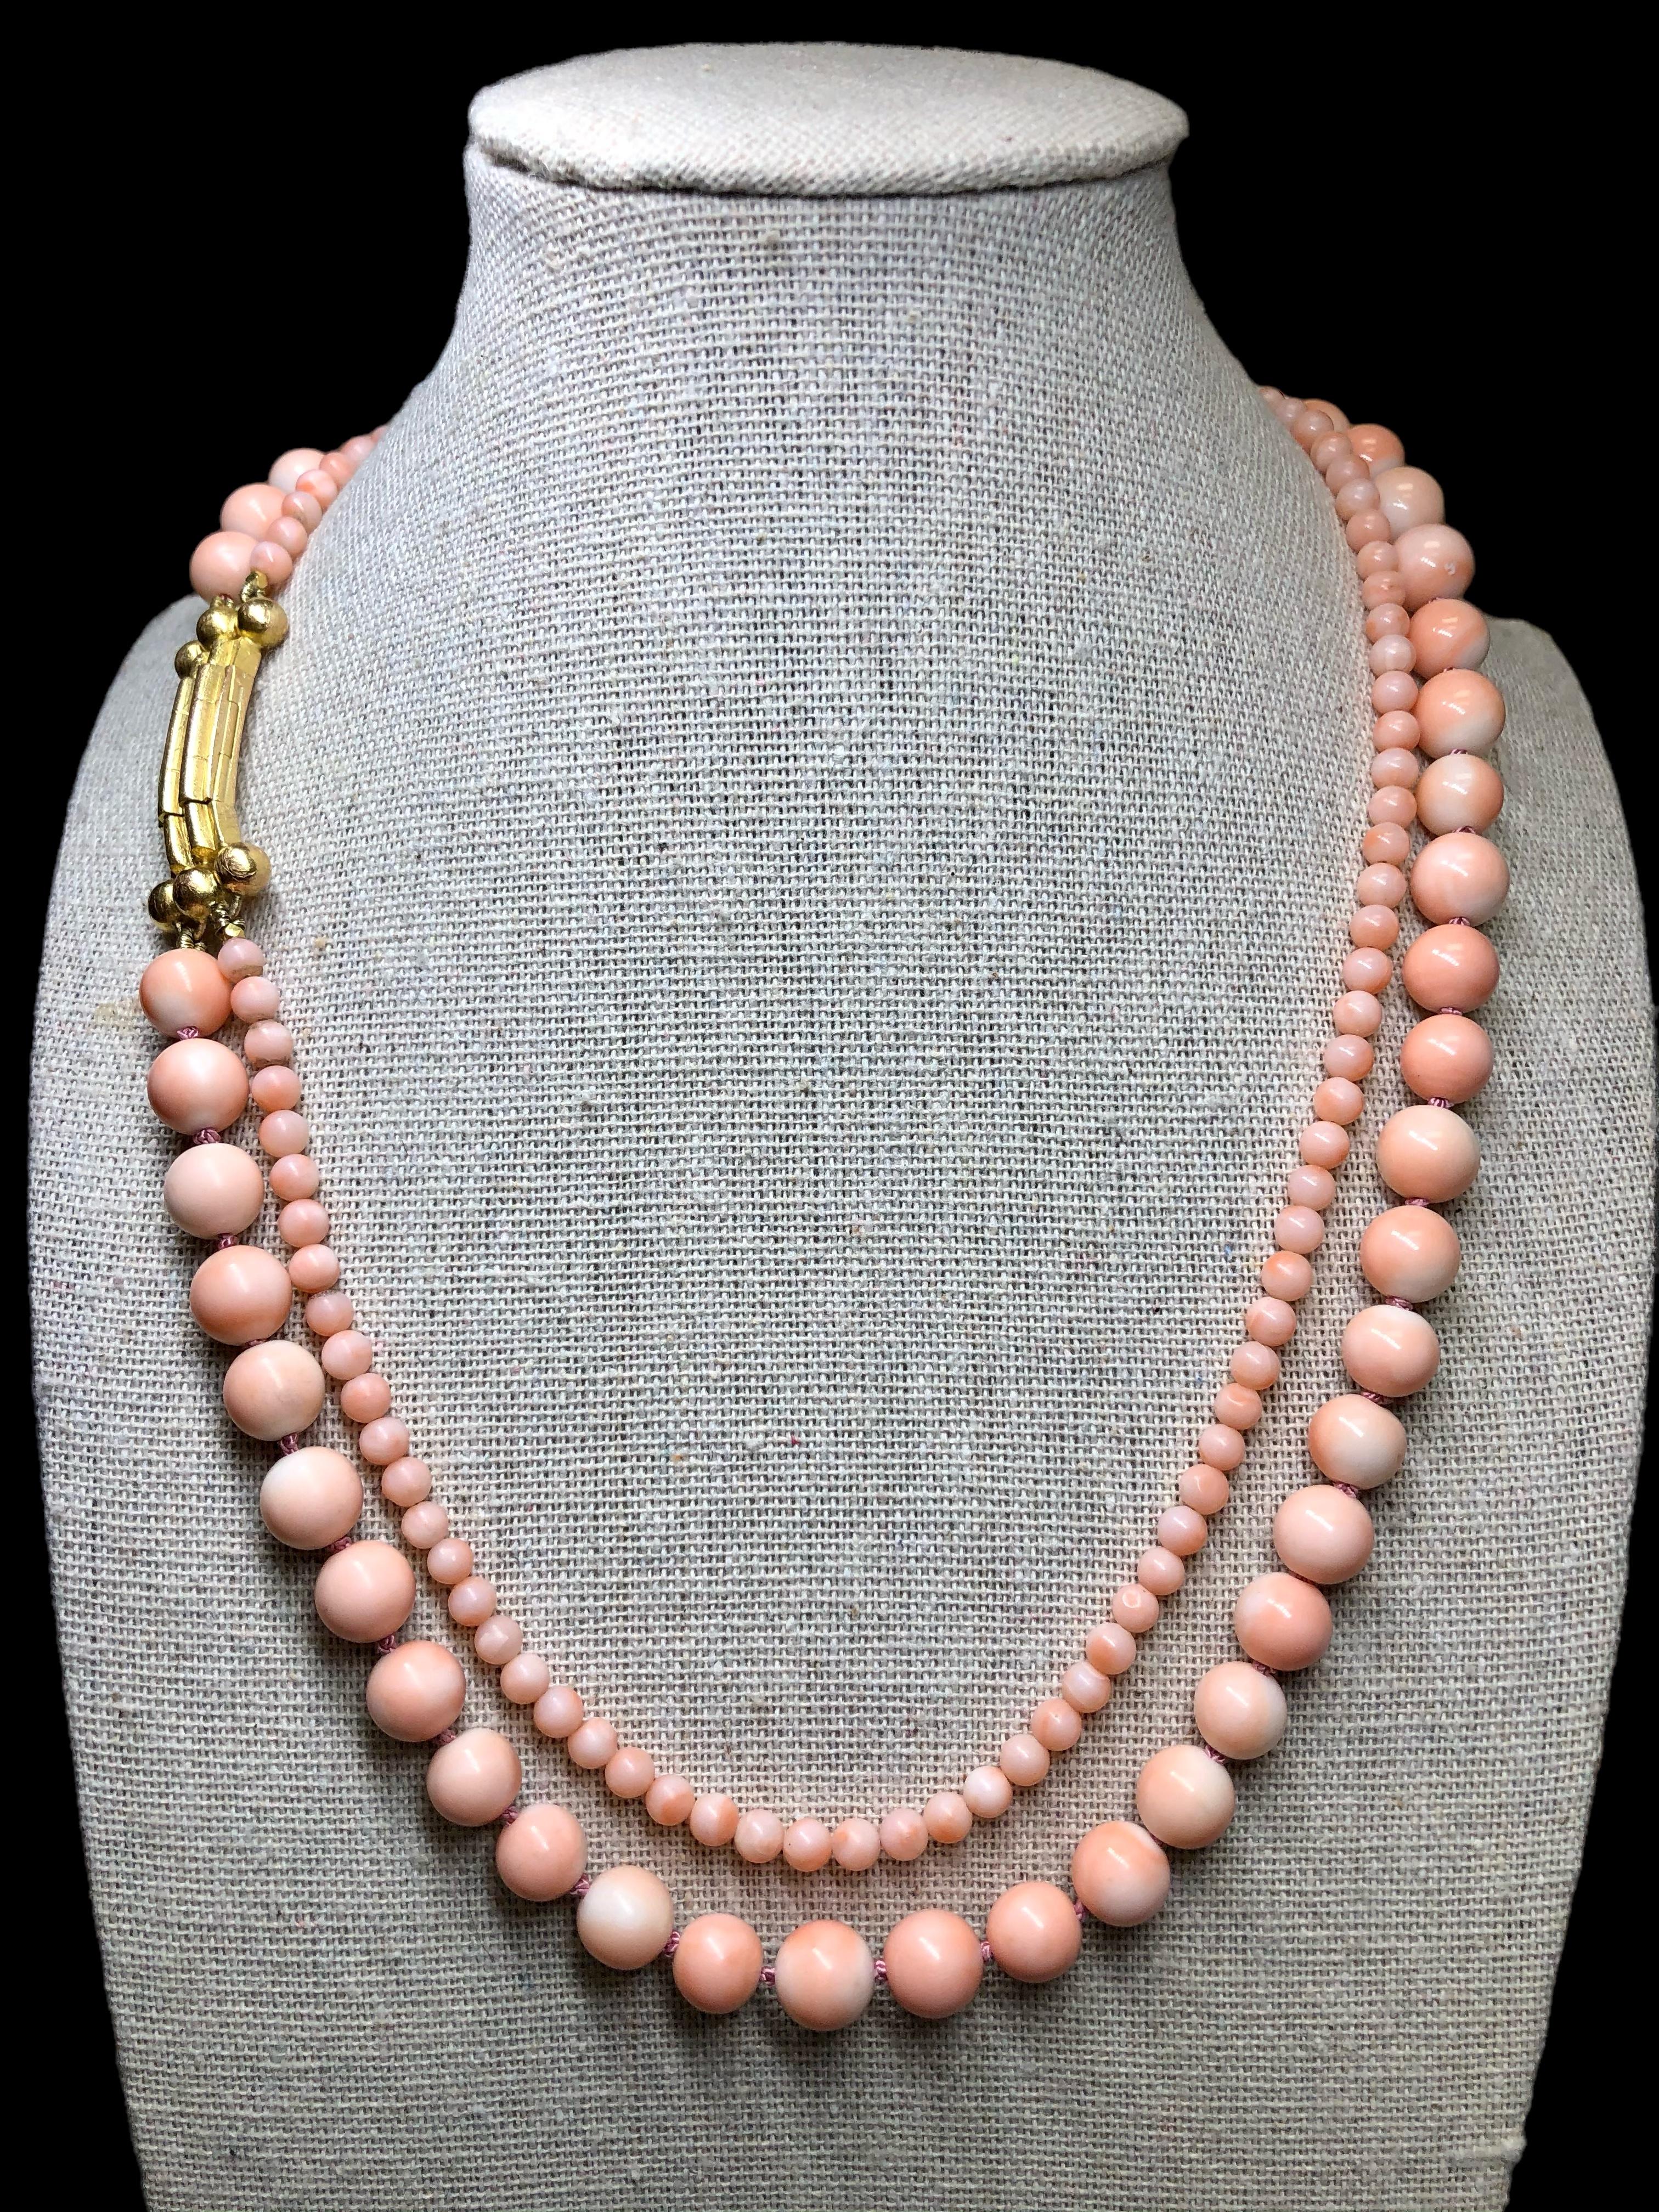 An elegant and unique French-made double strand coral necklace with 18K textured clasp with an open latch box clasp allowing a bit more length by changing position. Wears beautifully and is a welcomed addition to one’s own unique collection of fine